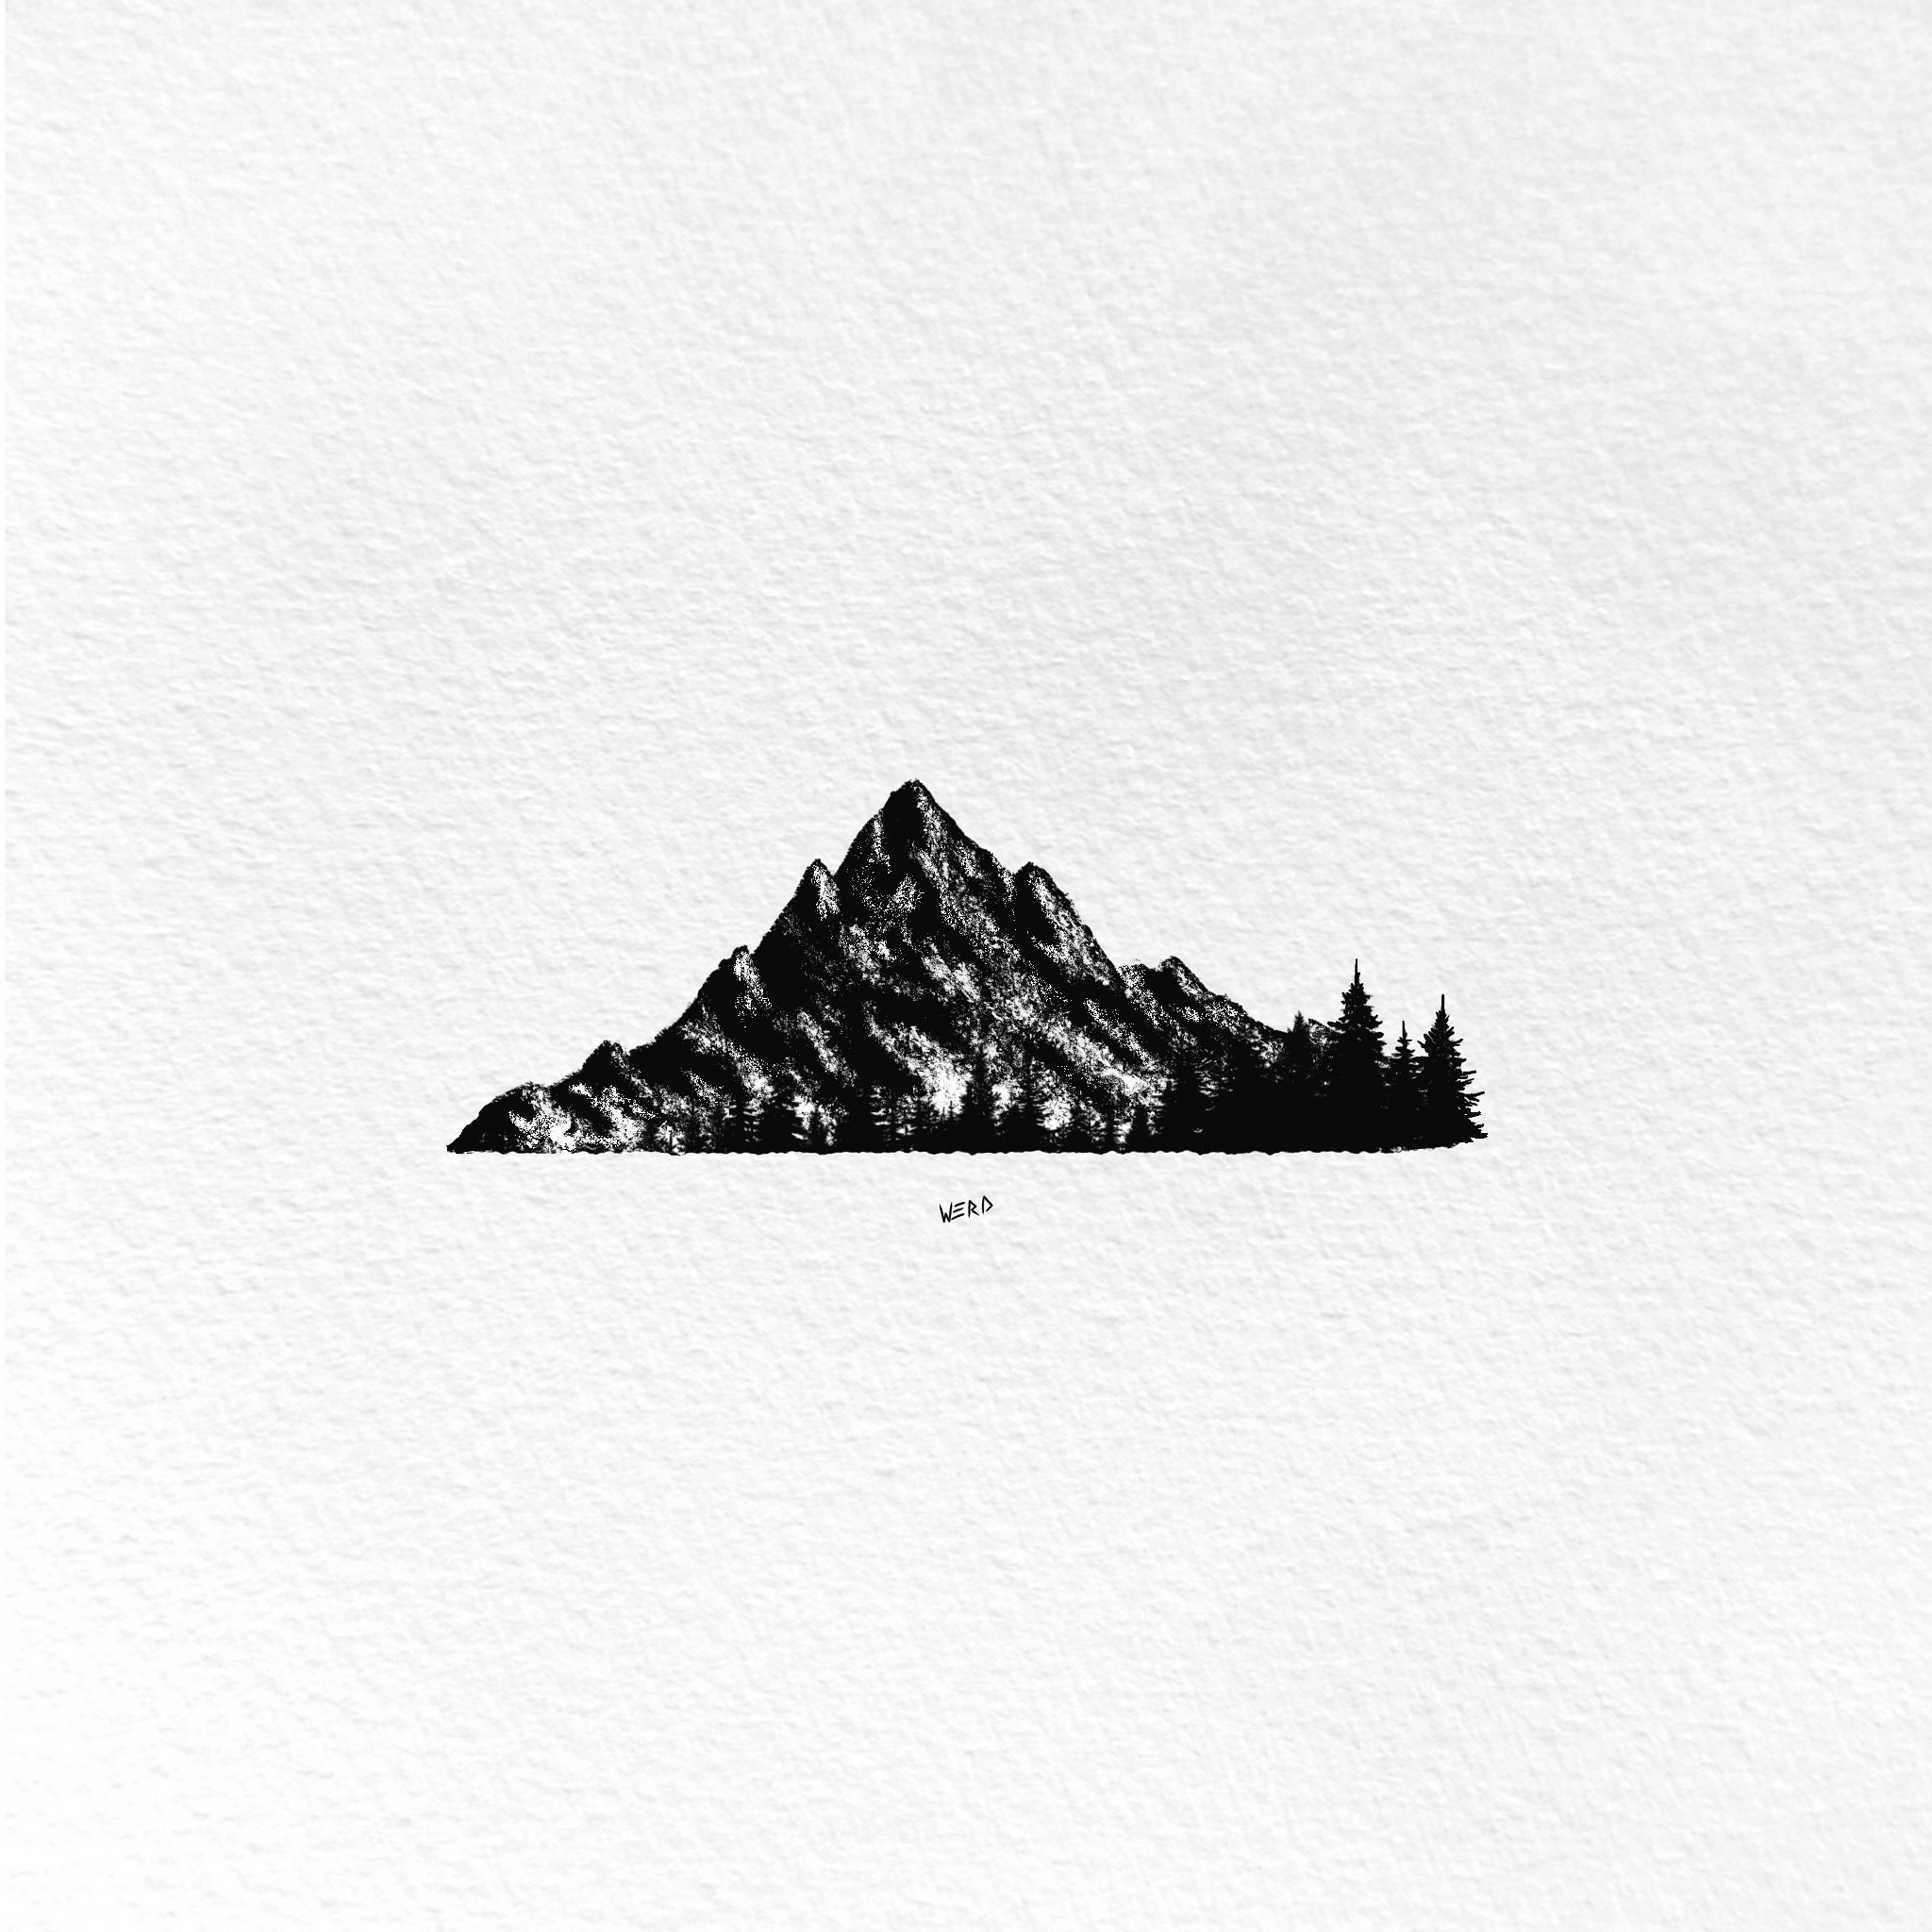 Mountain View. 
.
.
.
.
If you would like to use any of my designs for a tattoo, please support my work and purchase a Tattoo Certificate from my website. Use the product like on the post or link in my bio. Thanks so much! 
-Drew
.
.
.
#simpletattoo 